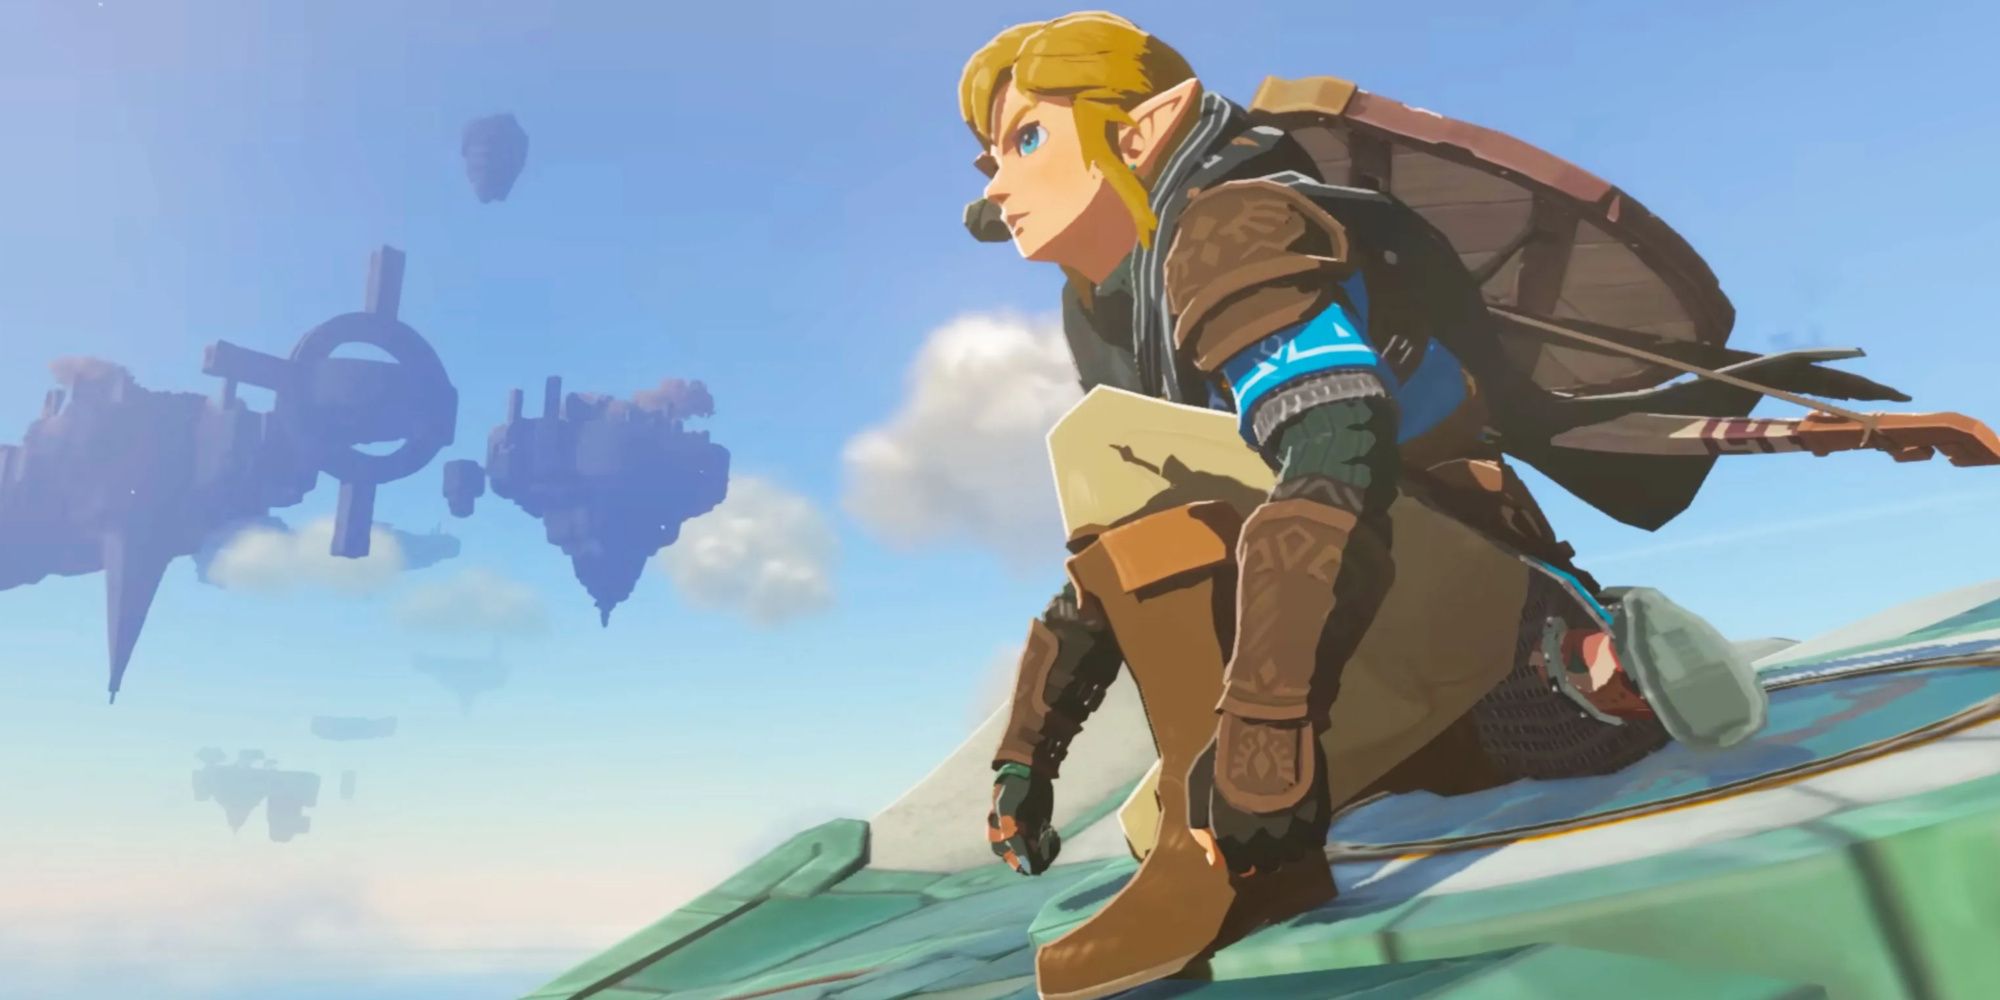 Link crouches on a Zonai Wing midair in Tears of the Kingdom